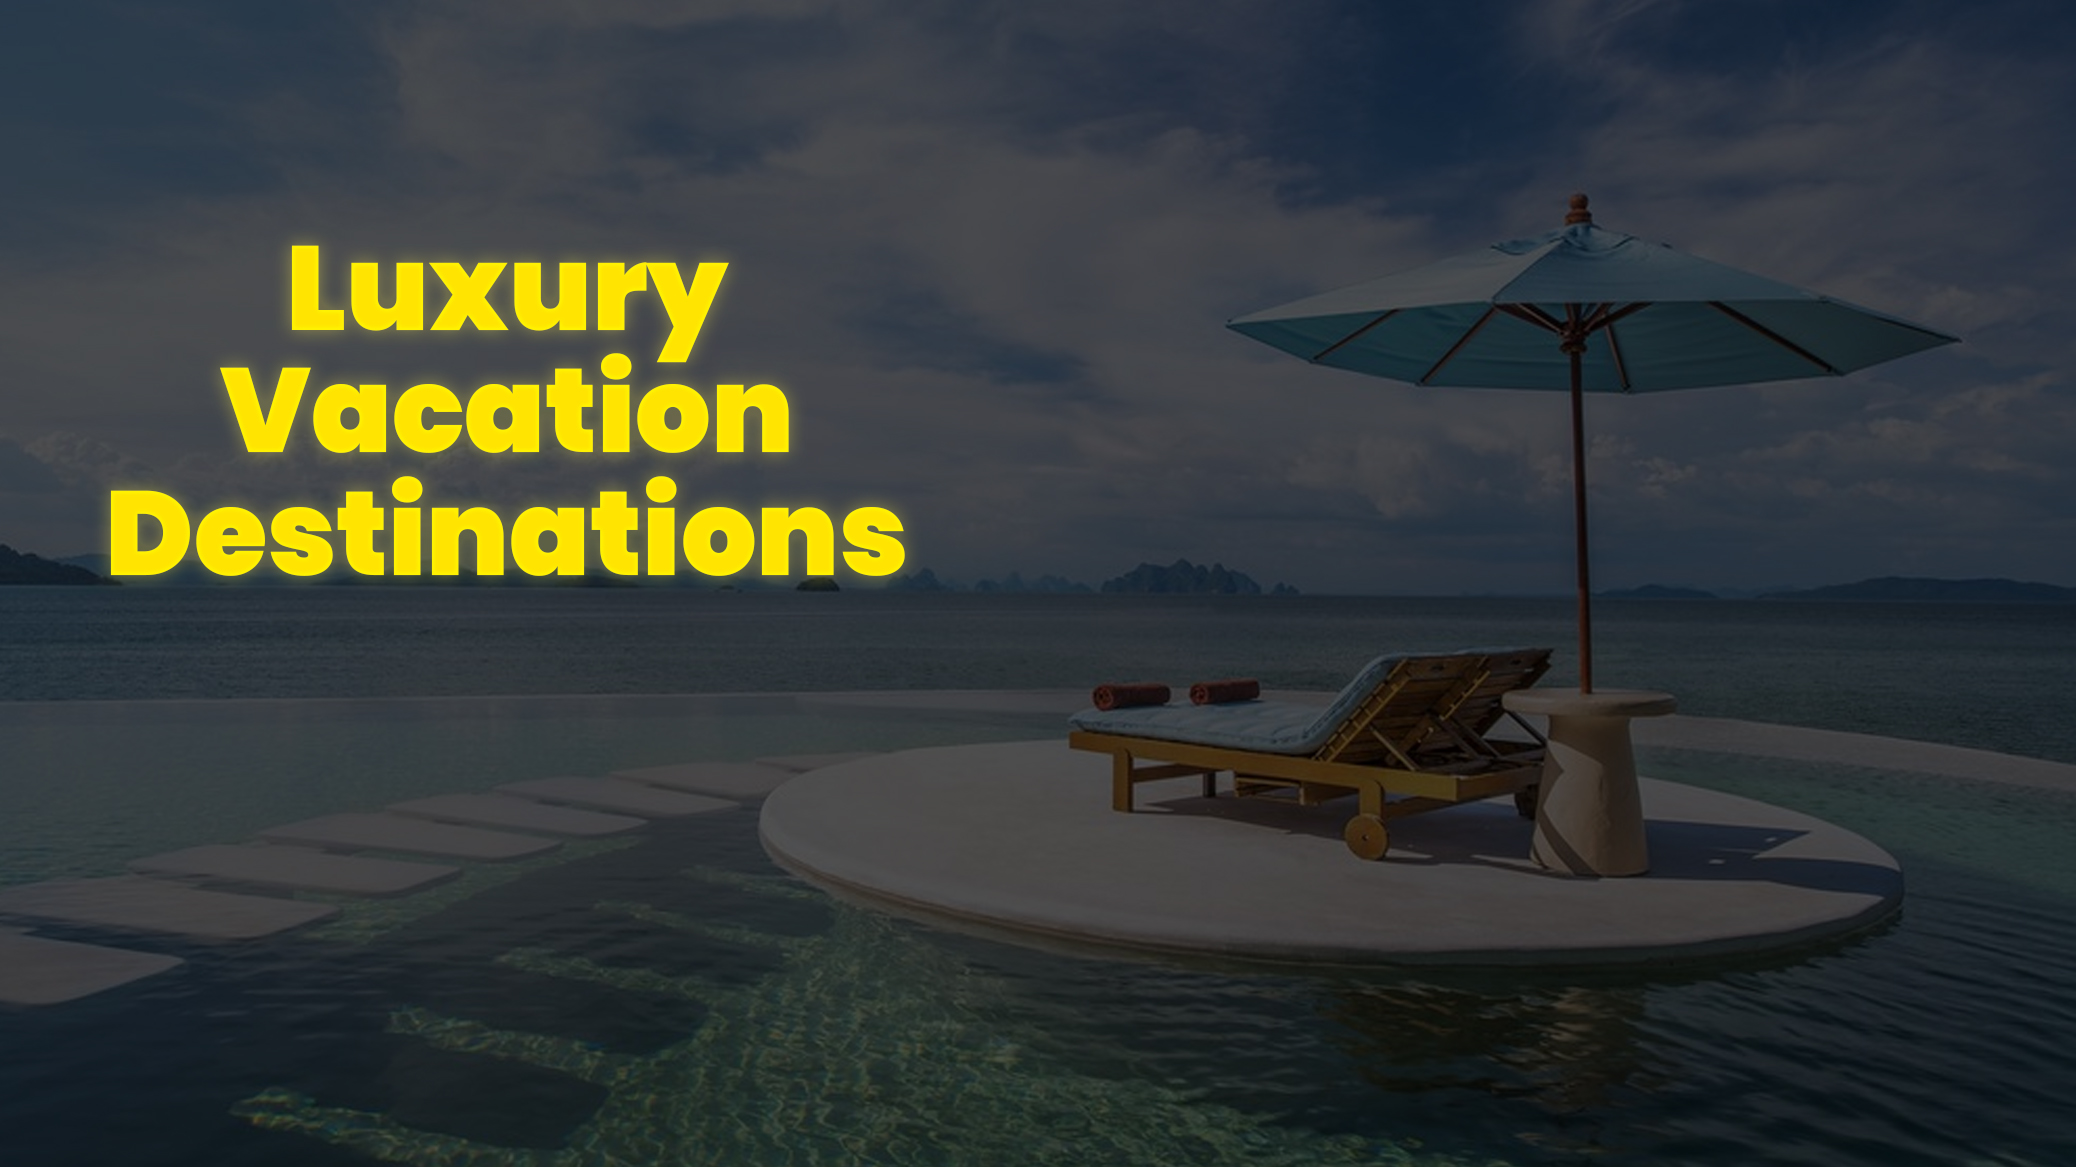 Luxury Vacation Destinations - Book Now!